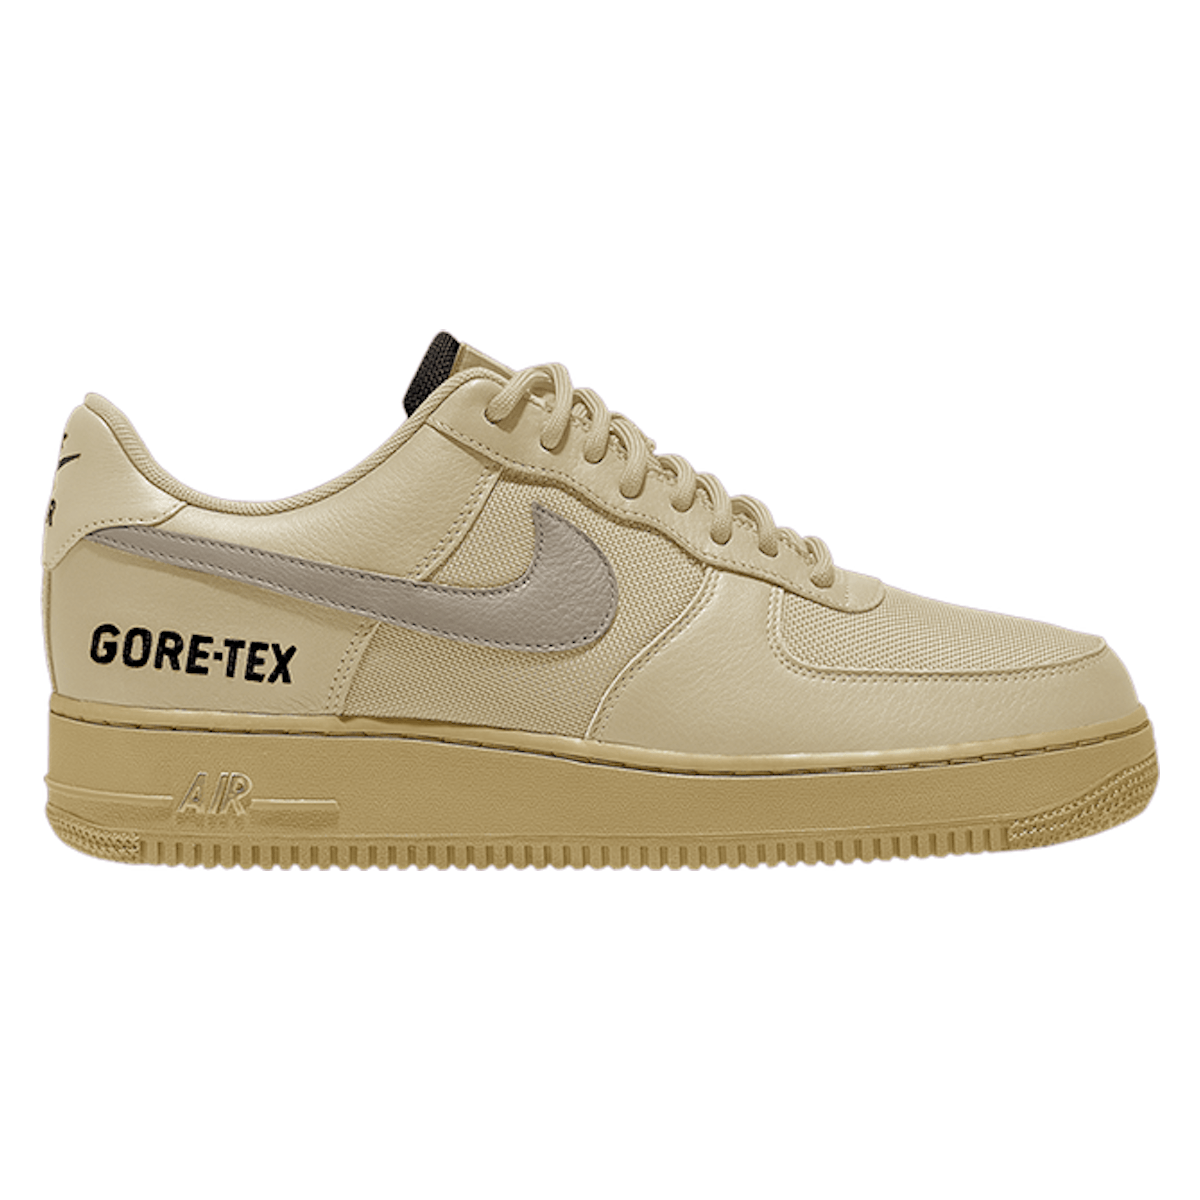 Gore-Tex x Nike Air Force 1 Low "Gold"